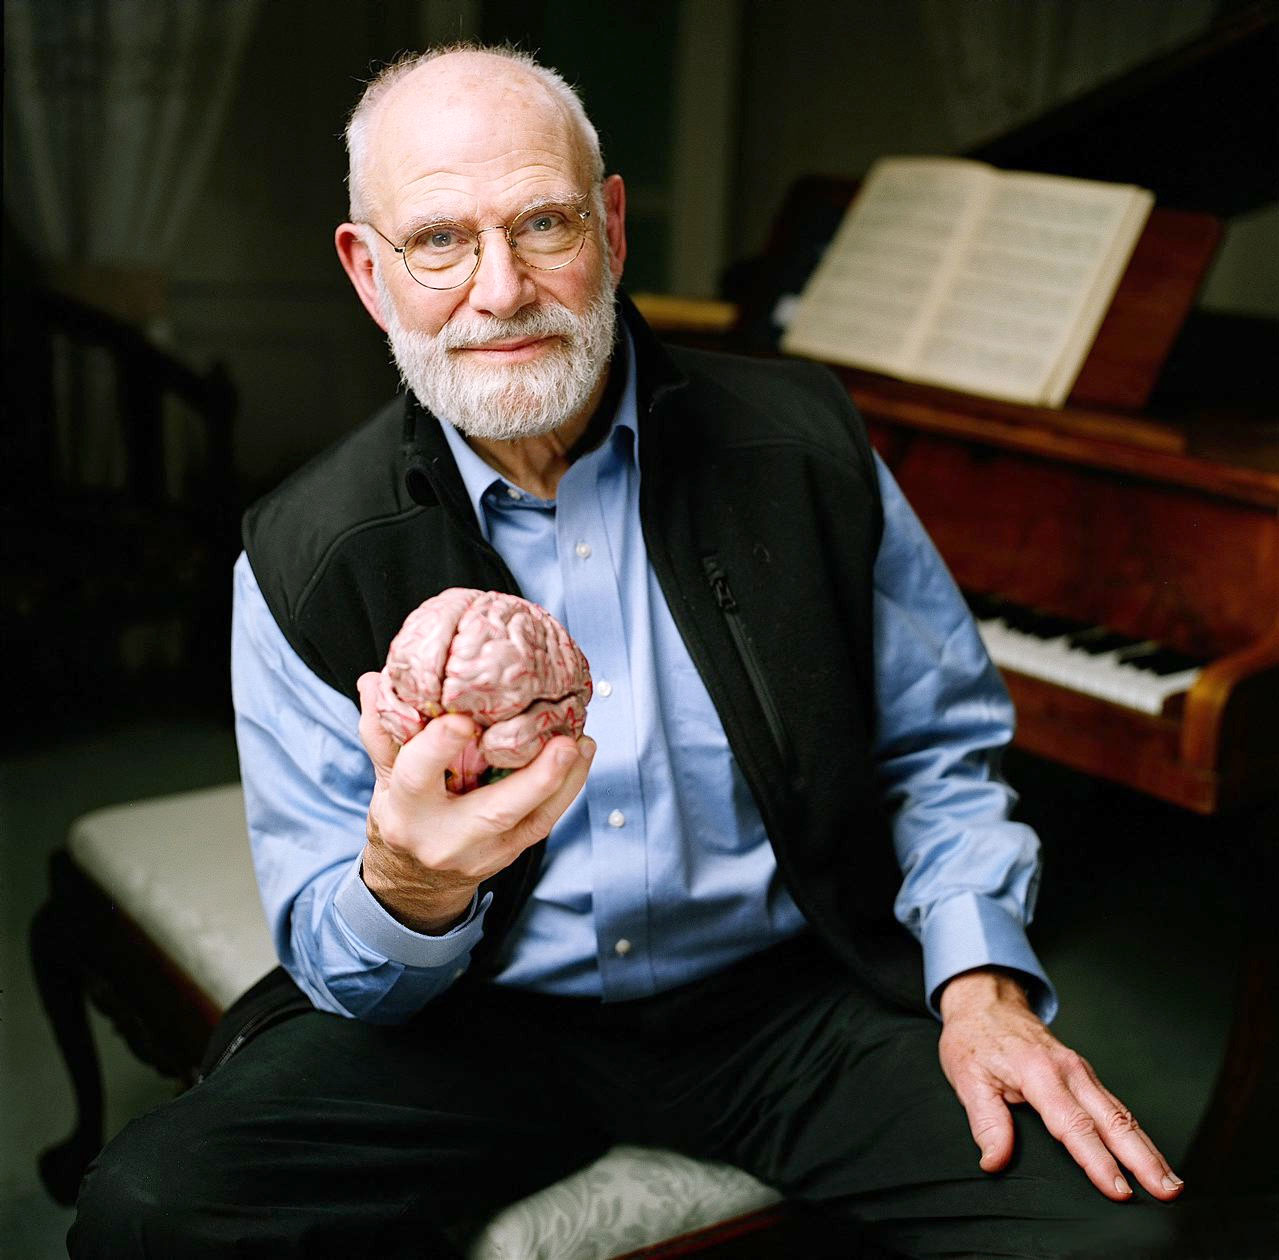 PHOTO: Neurologist Oliver Sacks poses at a piano while holding a model of a brain at the Chemistry Auditorium, University College London in London.